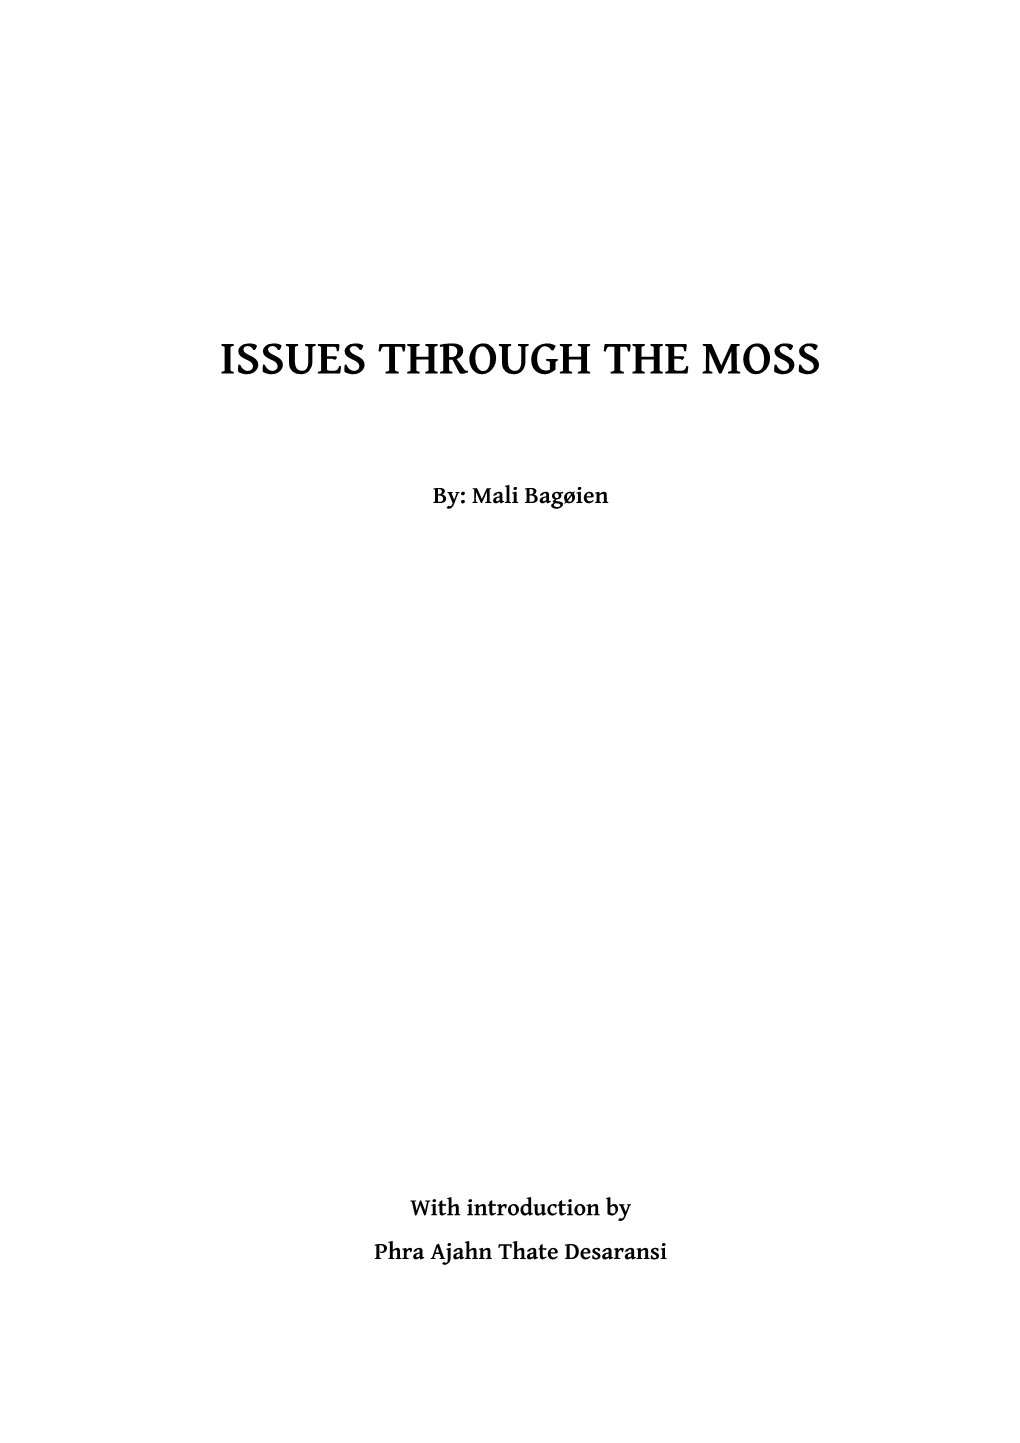 Issues Through the Moss